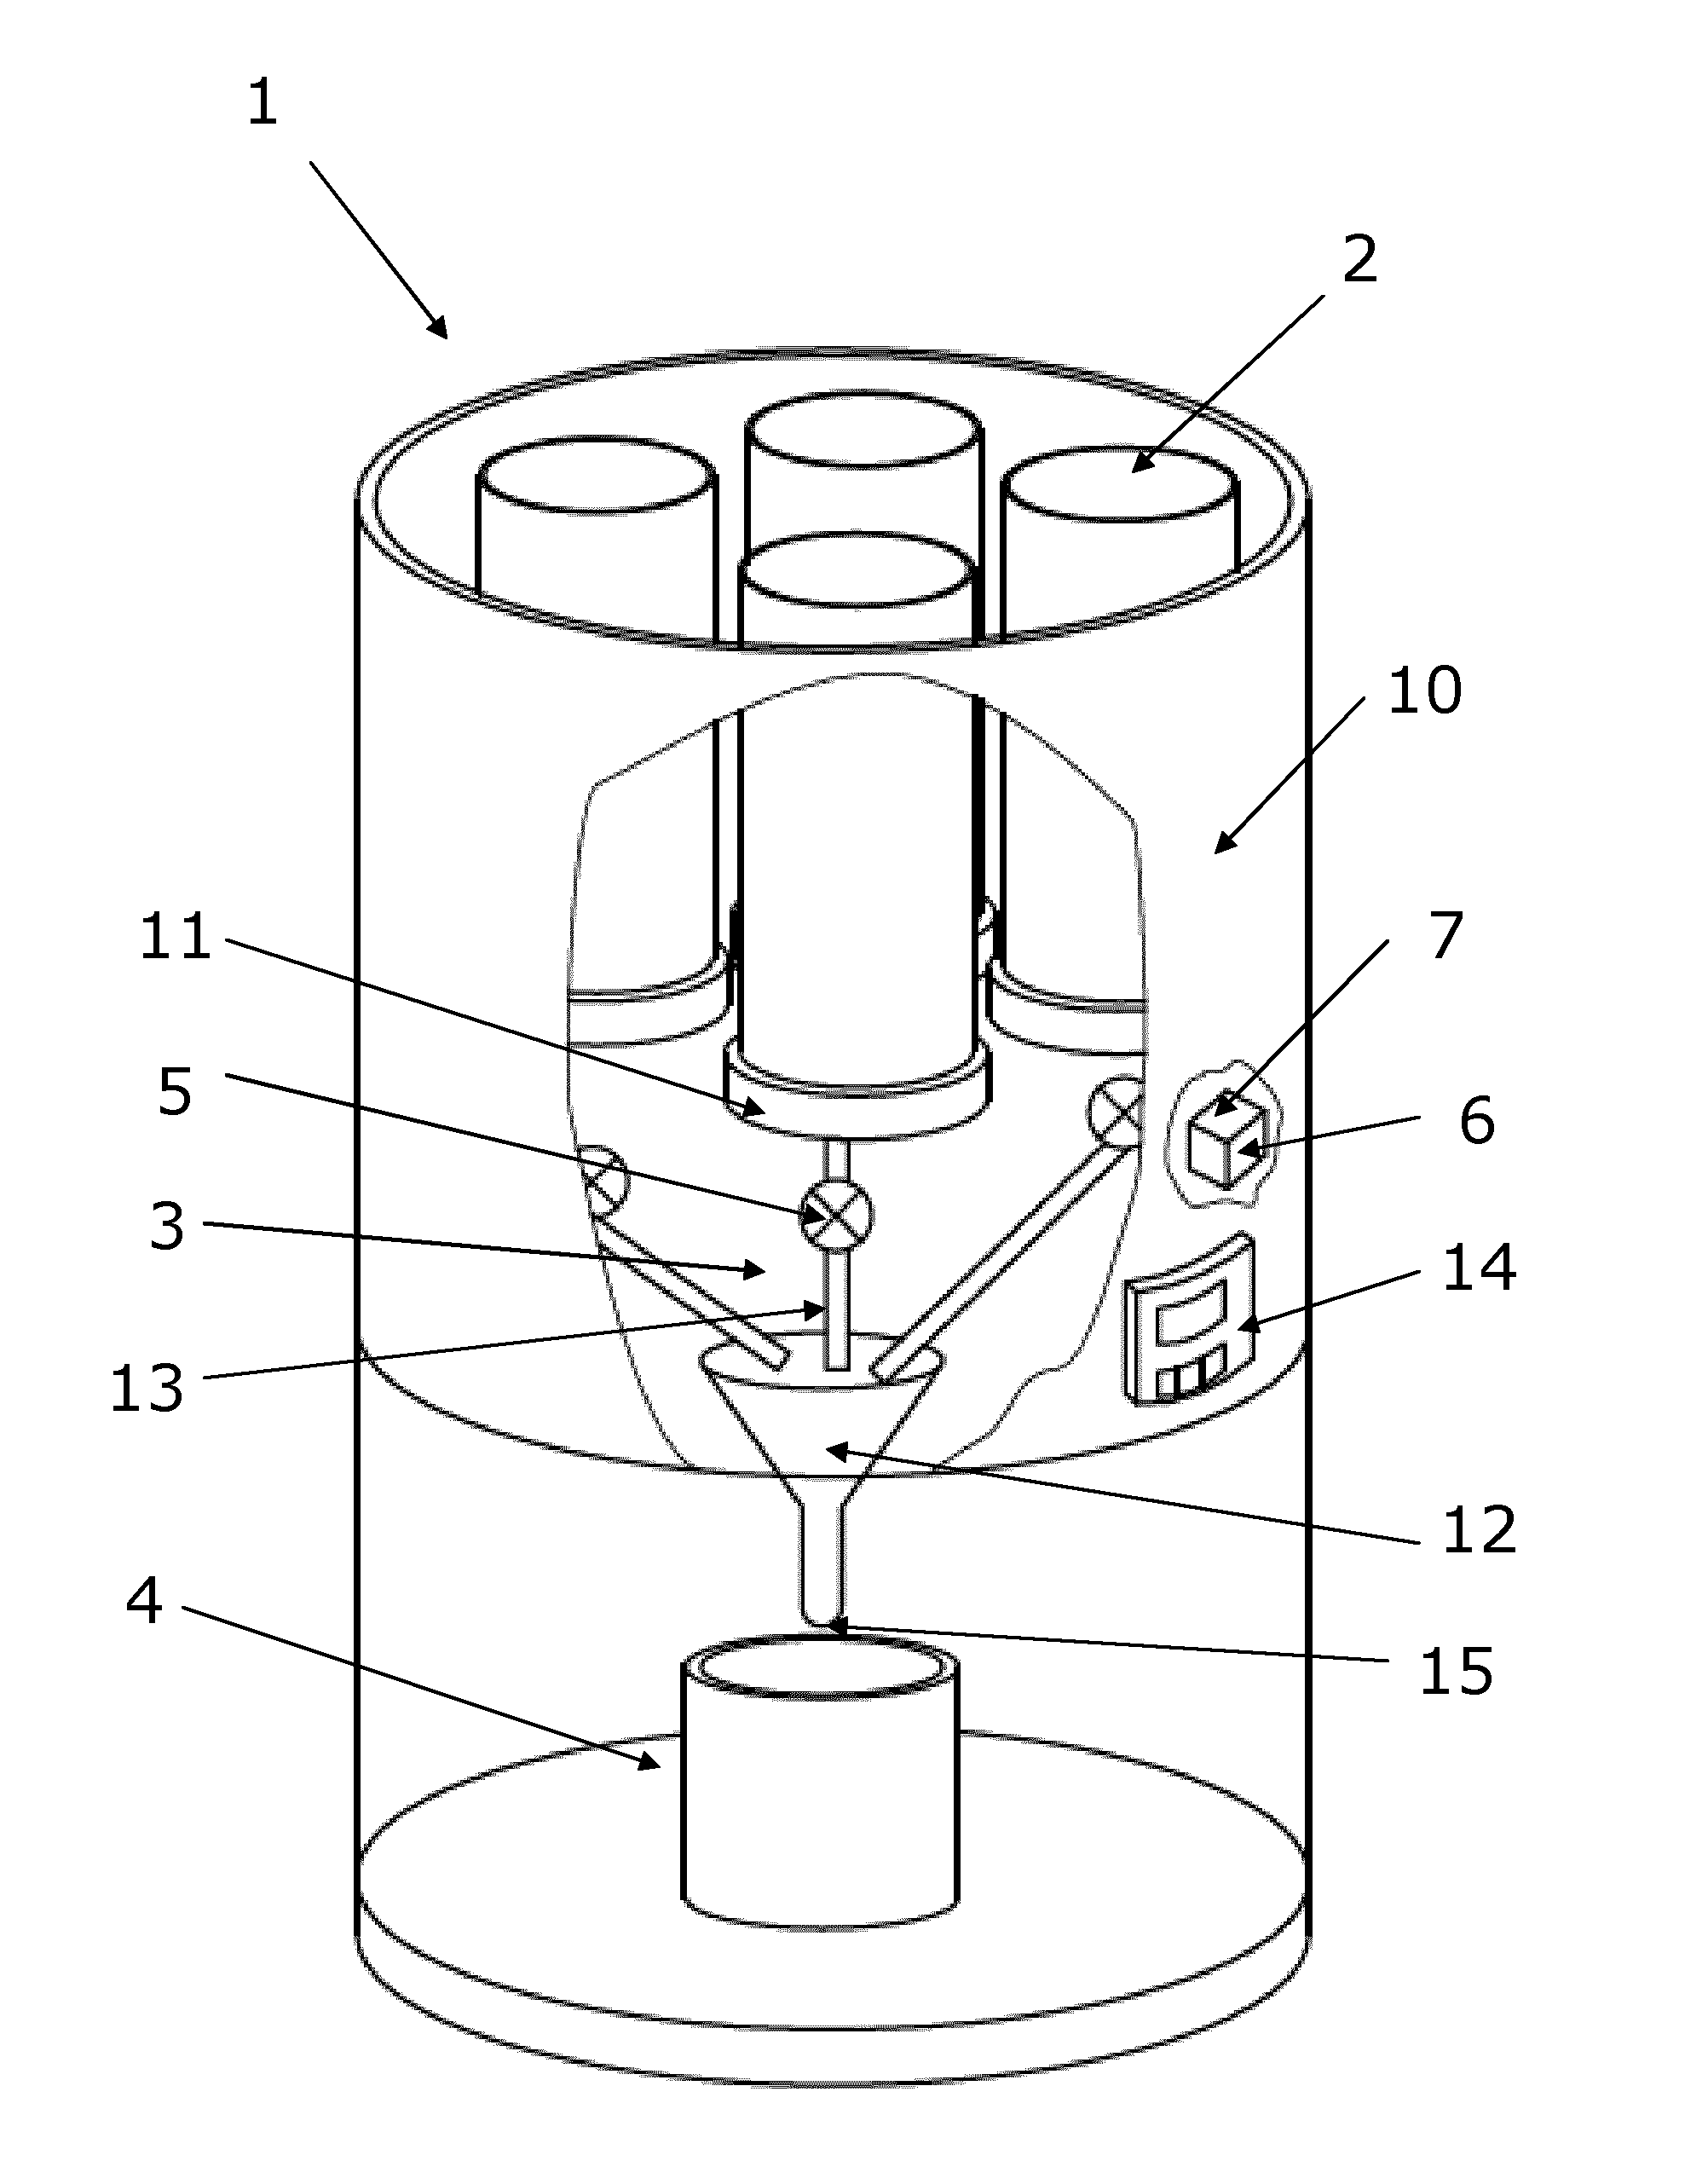 Apparatus and method for providing metered amounts of ingredient, especially for a tailored nutrition to infants